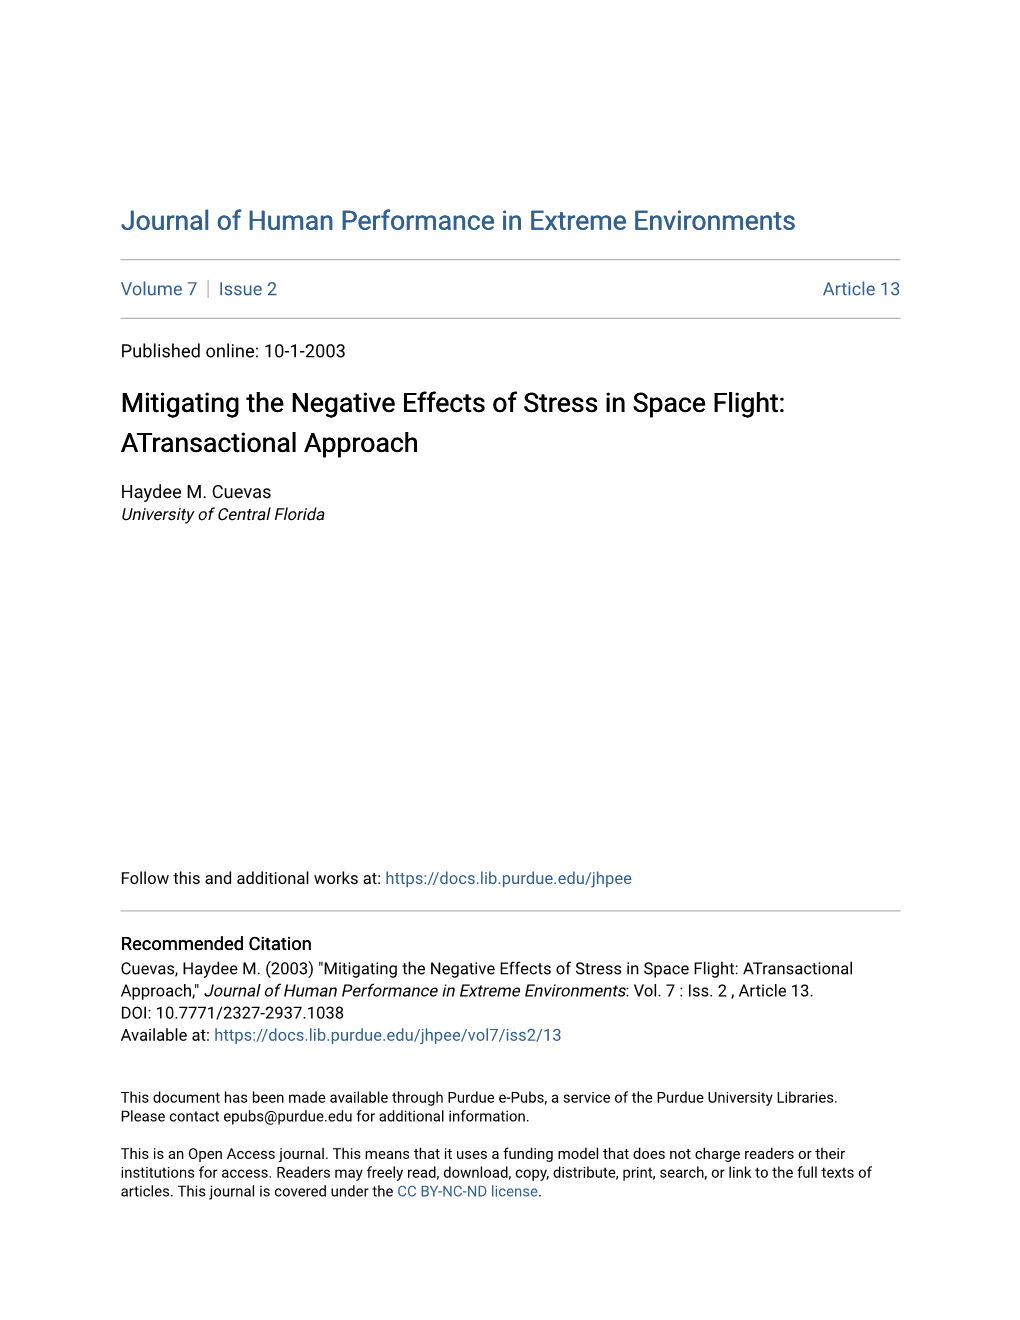 Mitigating the Negative Effects of Stress in Space Flight: Atransactional Approach